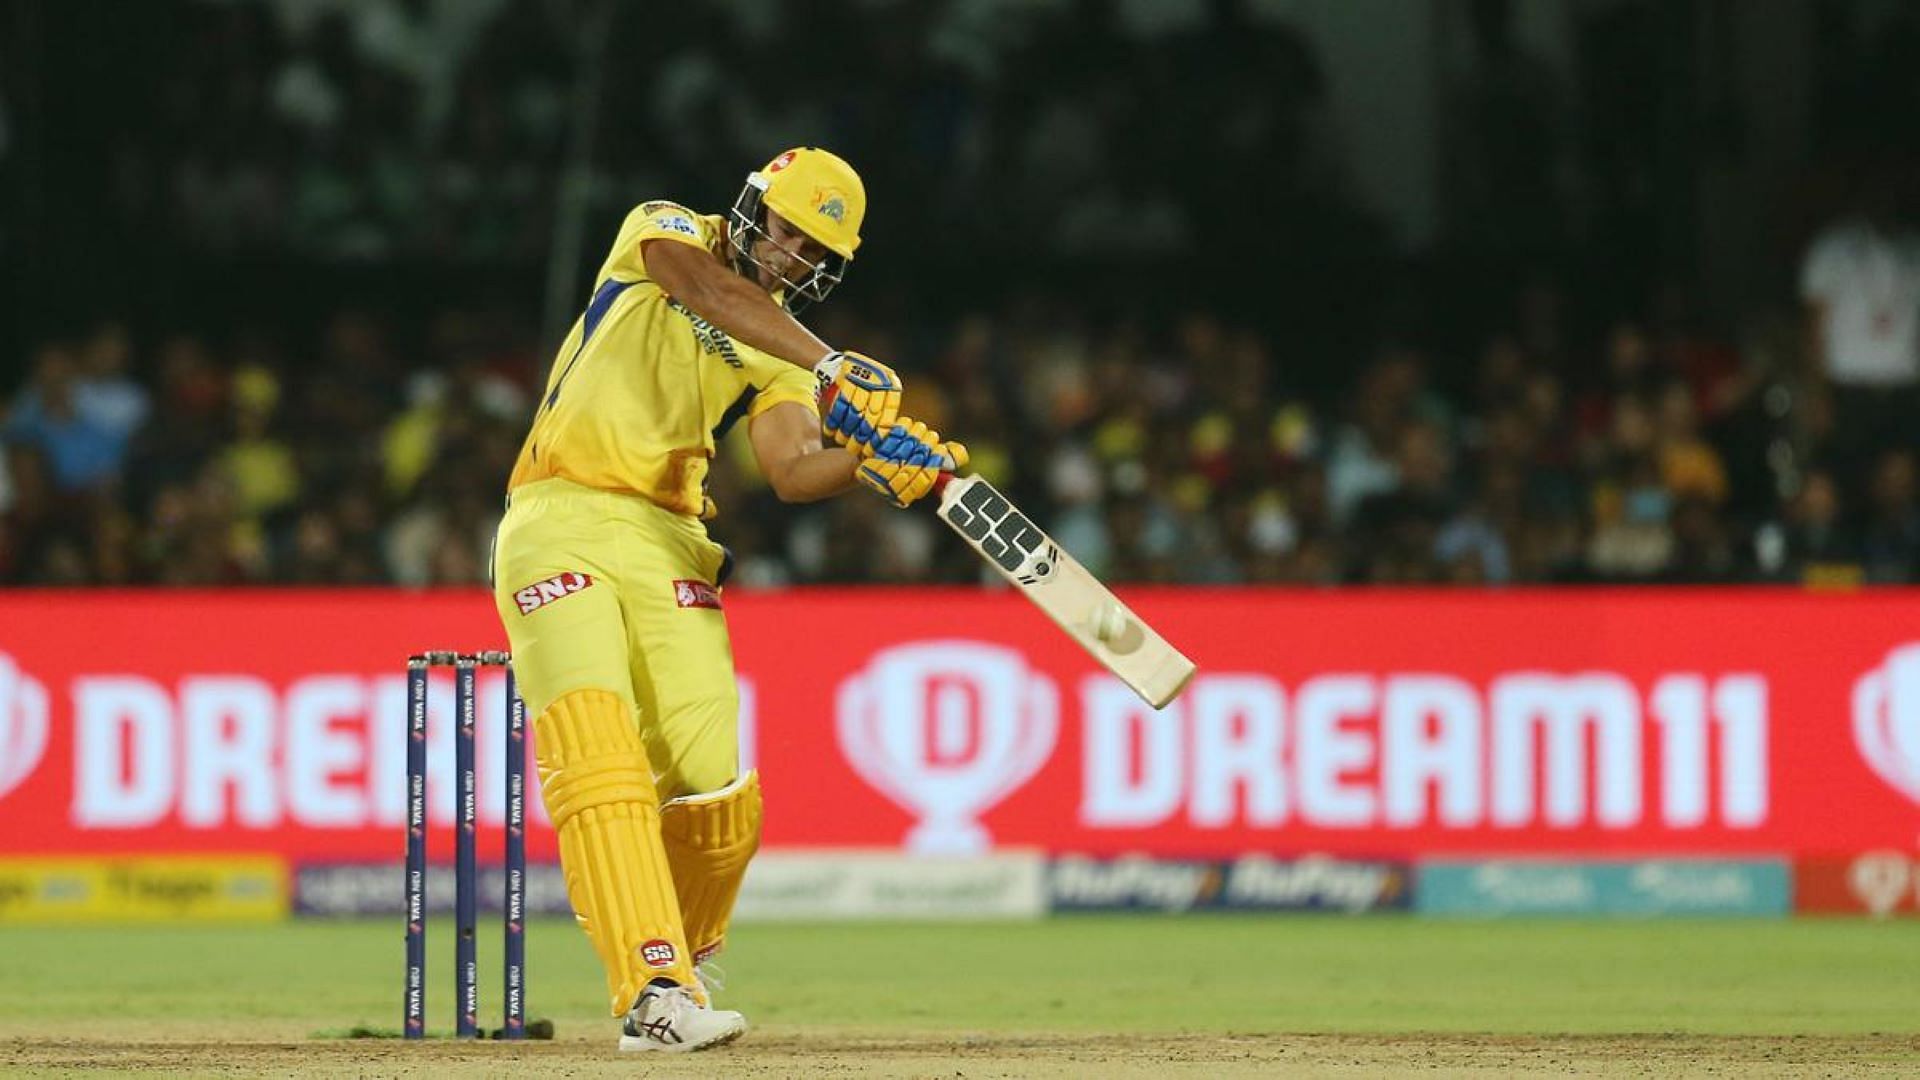 Shivam Dube has been a revelation in the middle order for CSK this season